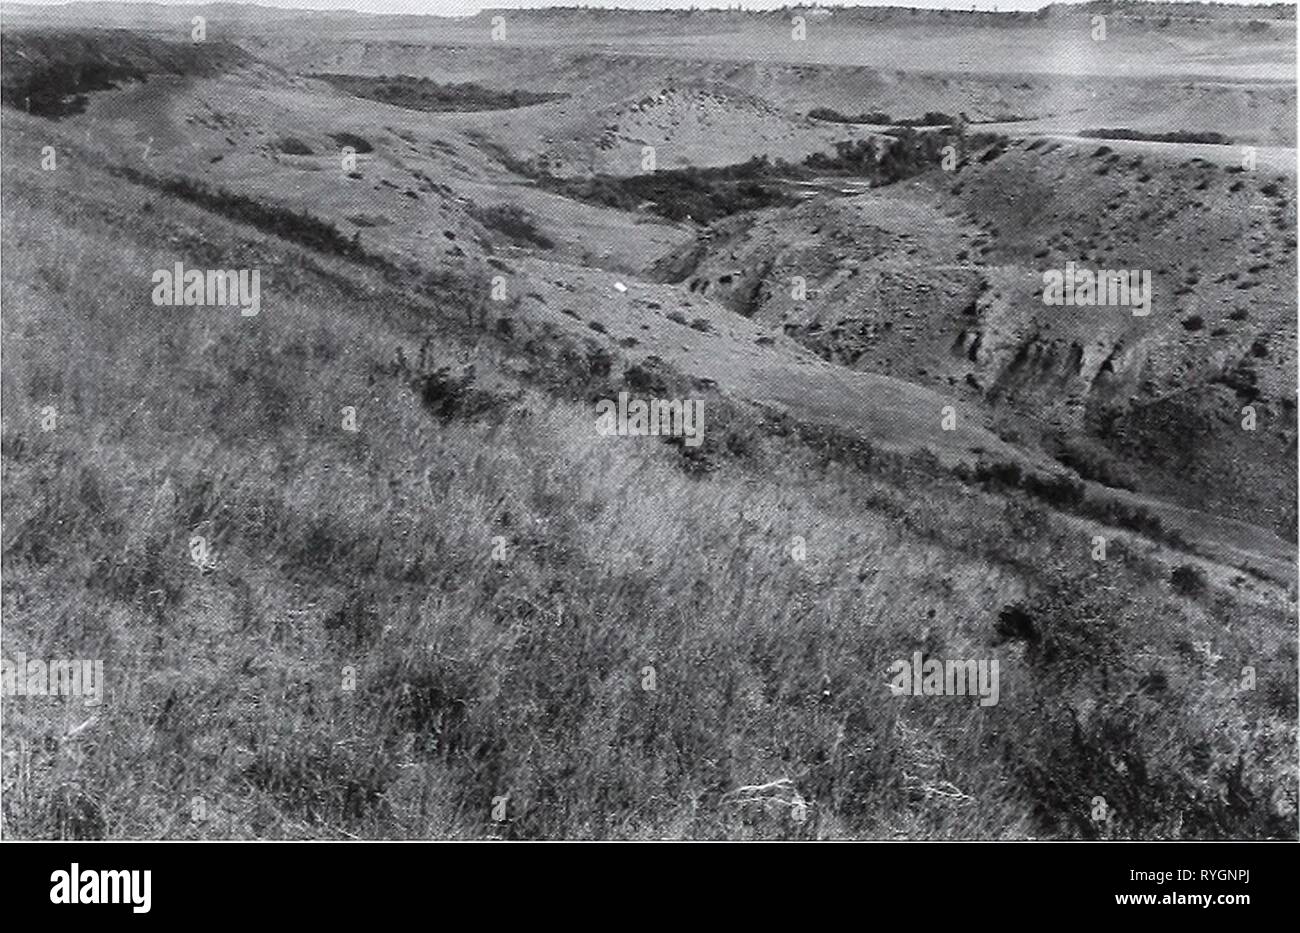 Eighty years of vegetation and landscape changes in the Northern Great Plains : a photographic record  eightyyearsofveg45klem Year: 2001  Original Photograph September 18, 1917. Shantz P-l-1917. Facing west-northwest. First Retake and Description June 30. 1959. W.S.P., H-2-1959. Looking WNW the origi- nal vegetation is Bouteloua spp. and Koeleria cristata. Carex Jilifolia is abundant in flat areas. Shrub in grass is Artemisia frig ida. Shepherdia canadensis is a common shrub on the hillsides and bottom- lands. Erosion not evident. Trees in creek bottom are better devel- oped in later picture ( Stock Photo